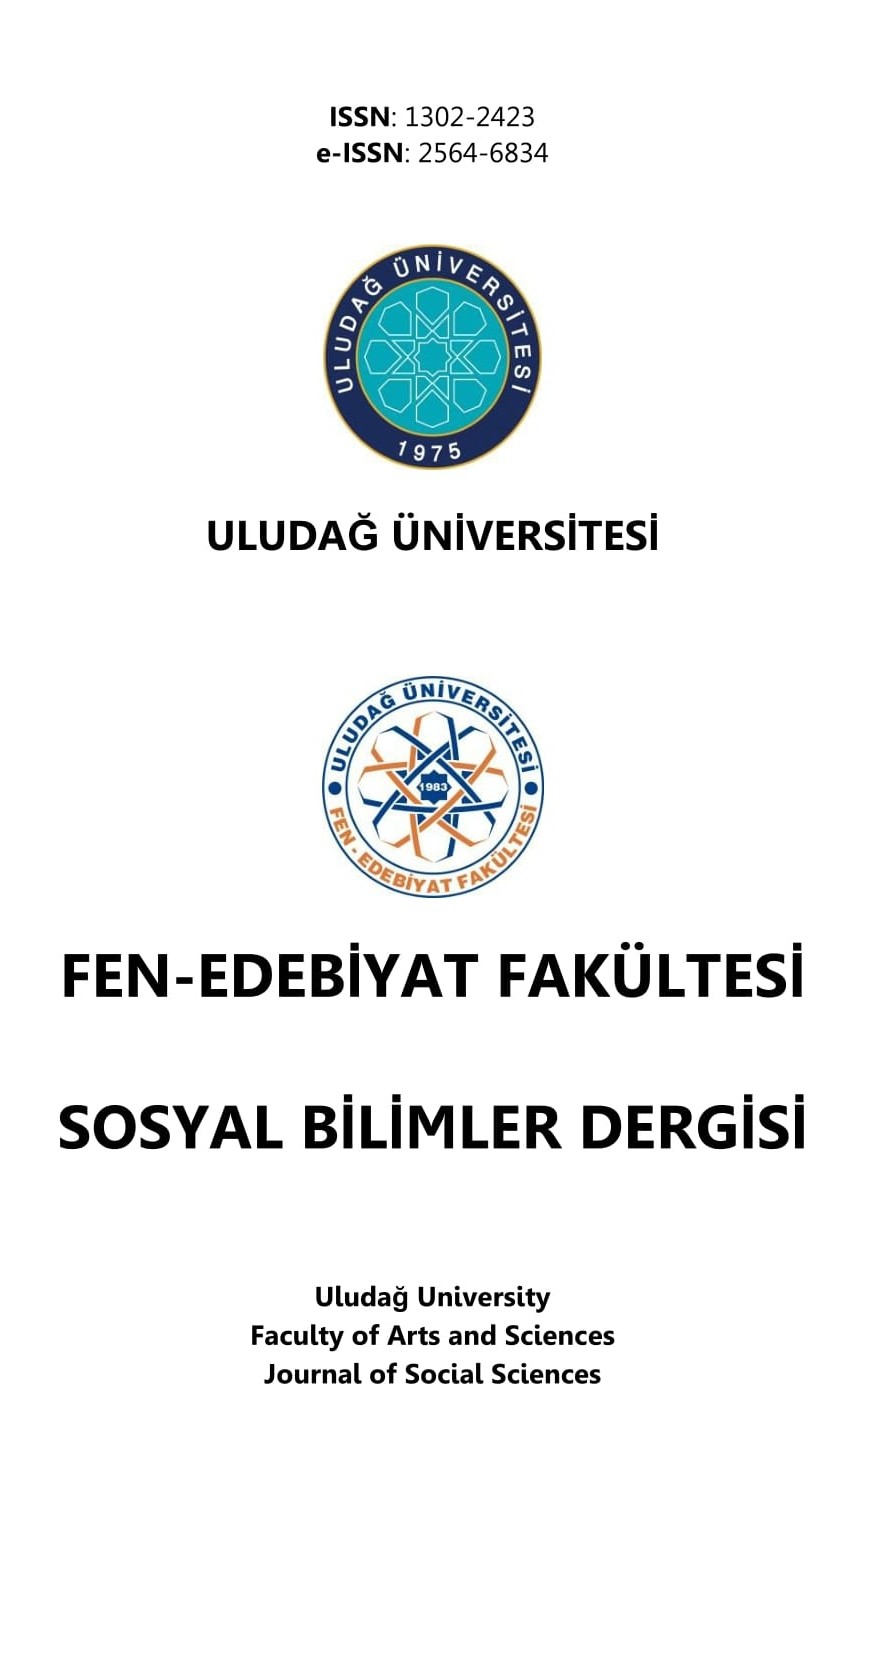 Uludağ University Faculty of Arts and Sciences Journal of Social Sciences